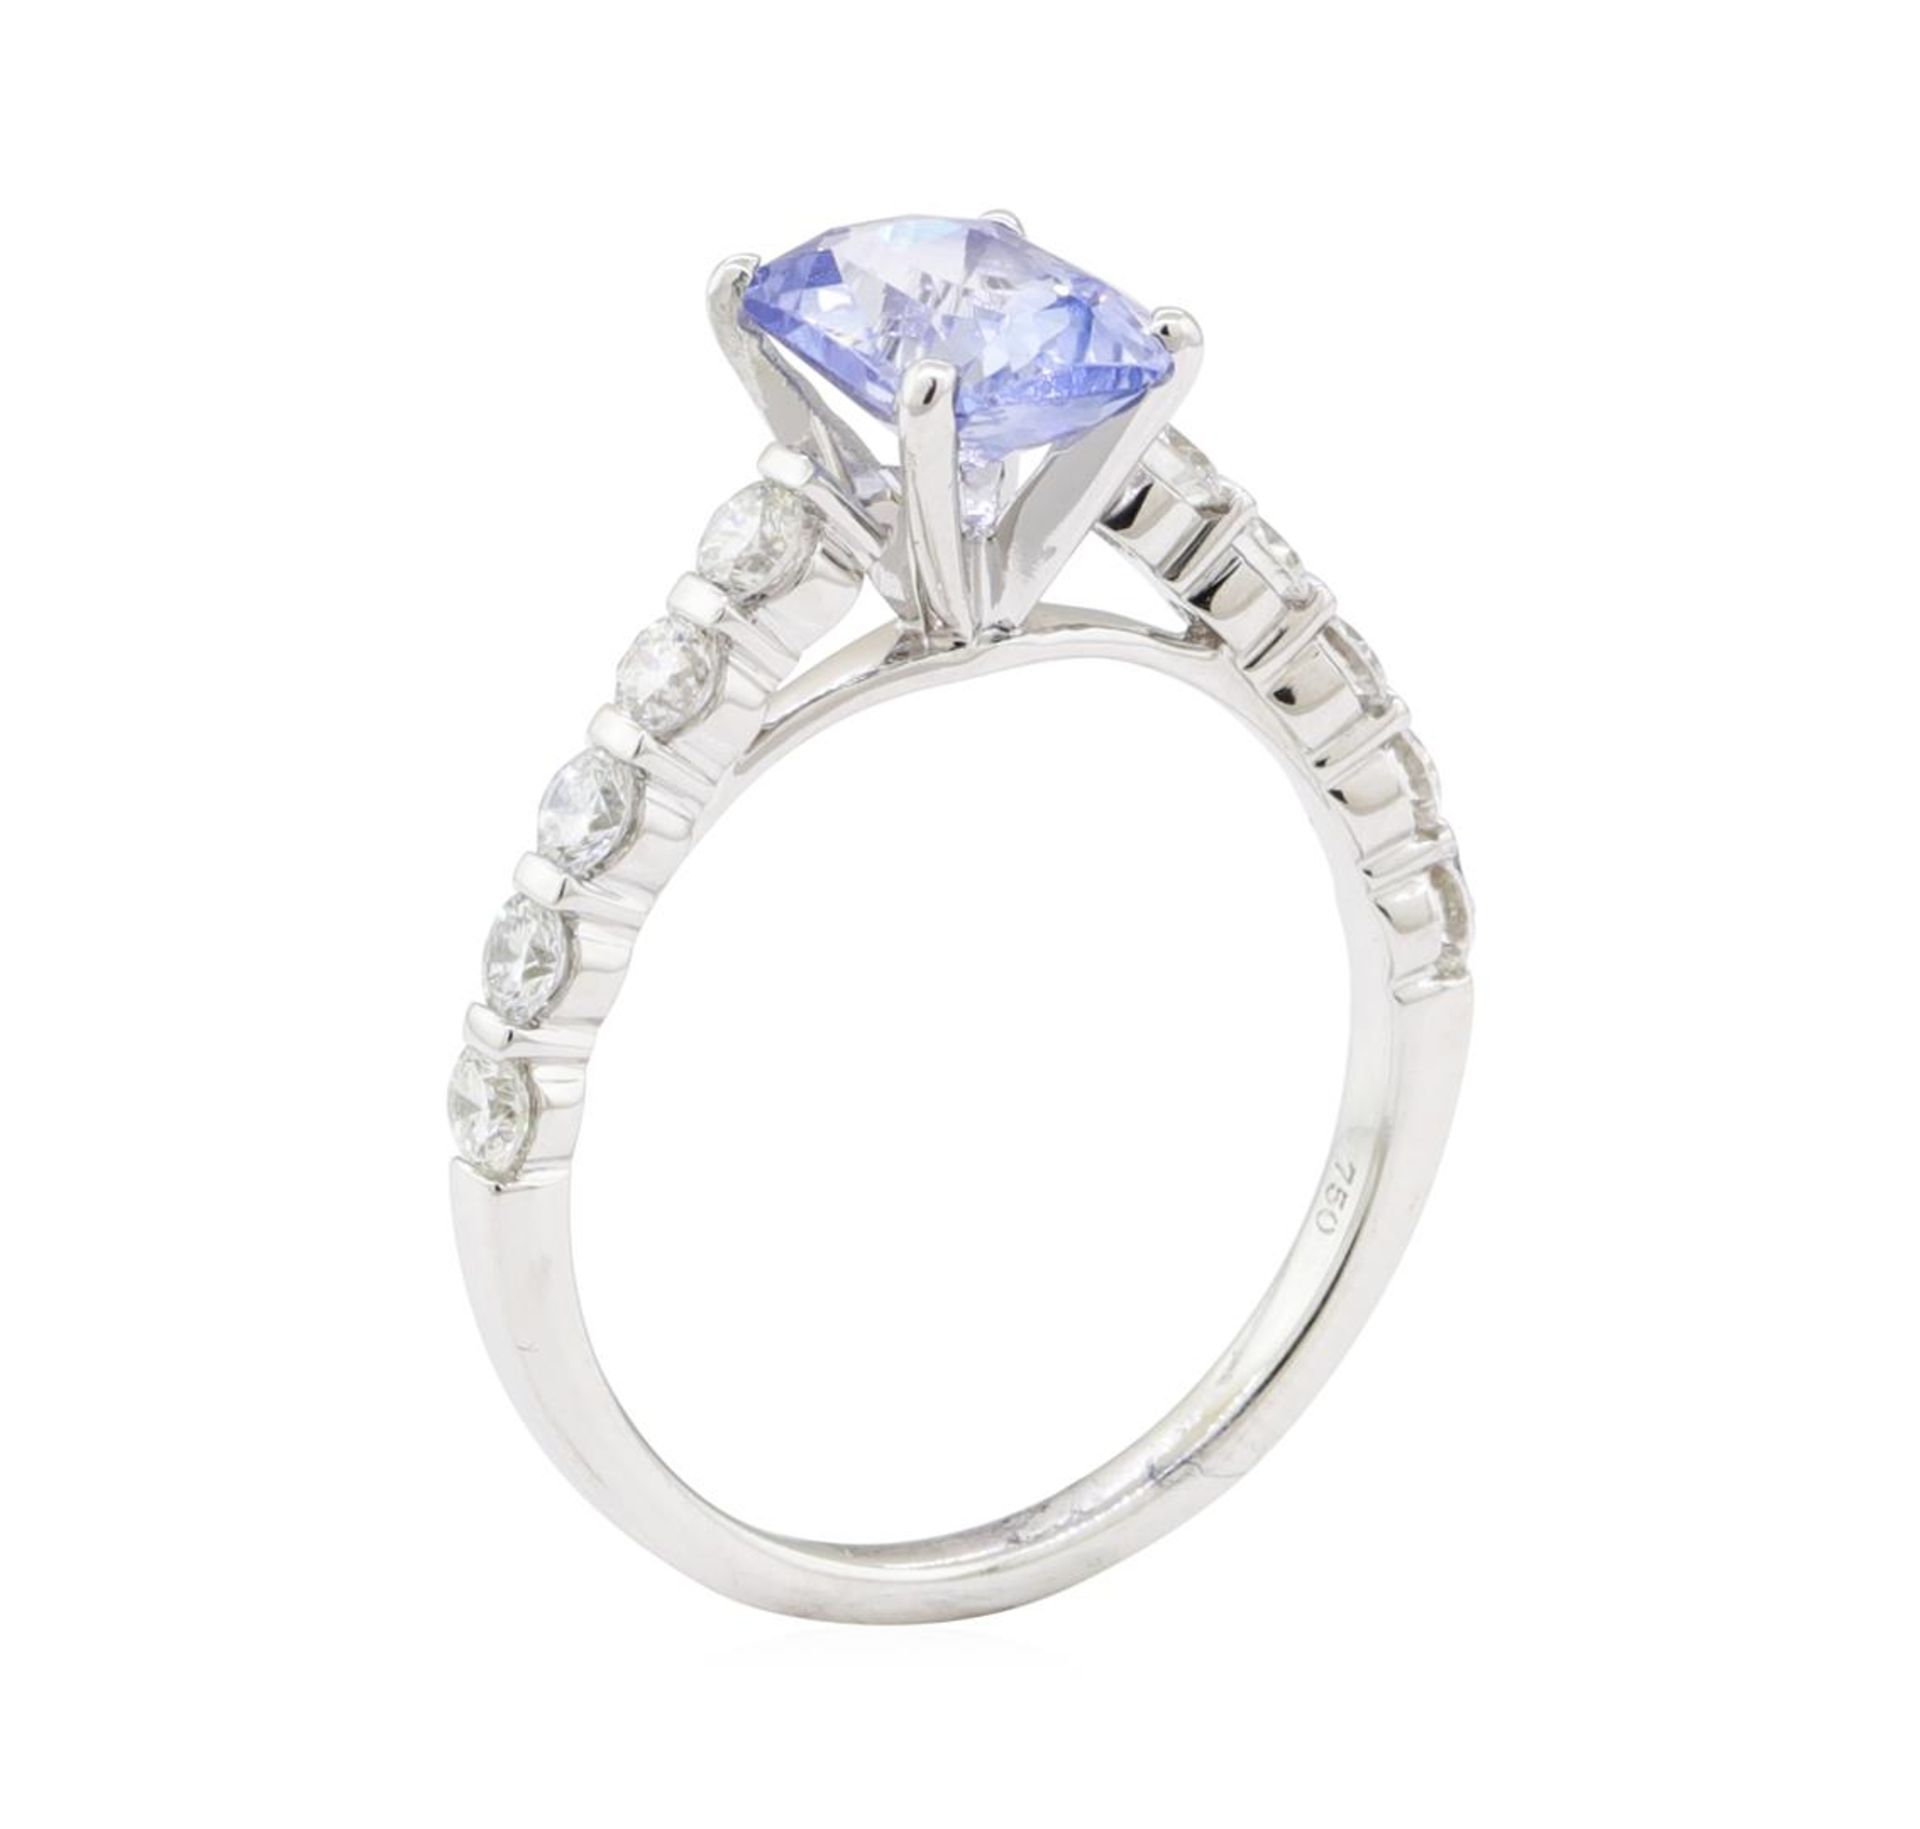 2.34 ctw Sapphire and Diamond Ring - 18KT White Gold - Image 4 of 4